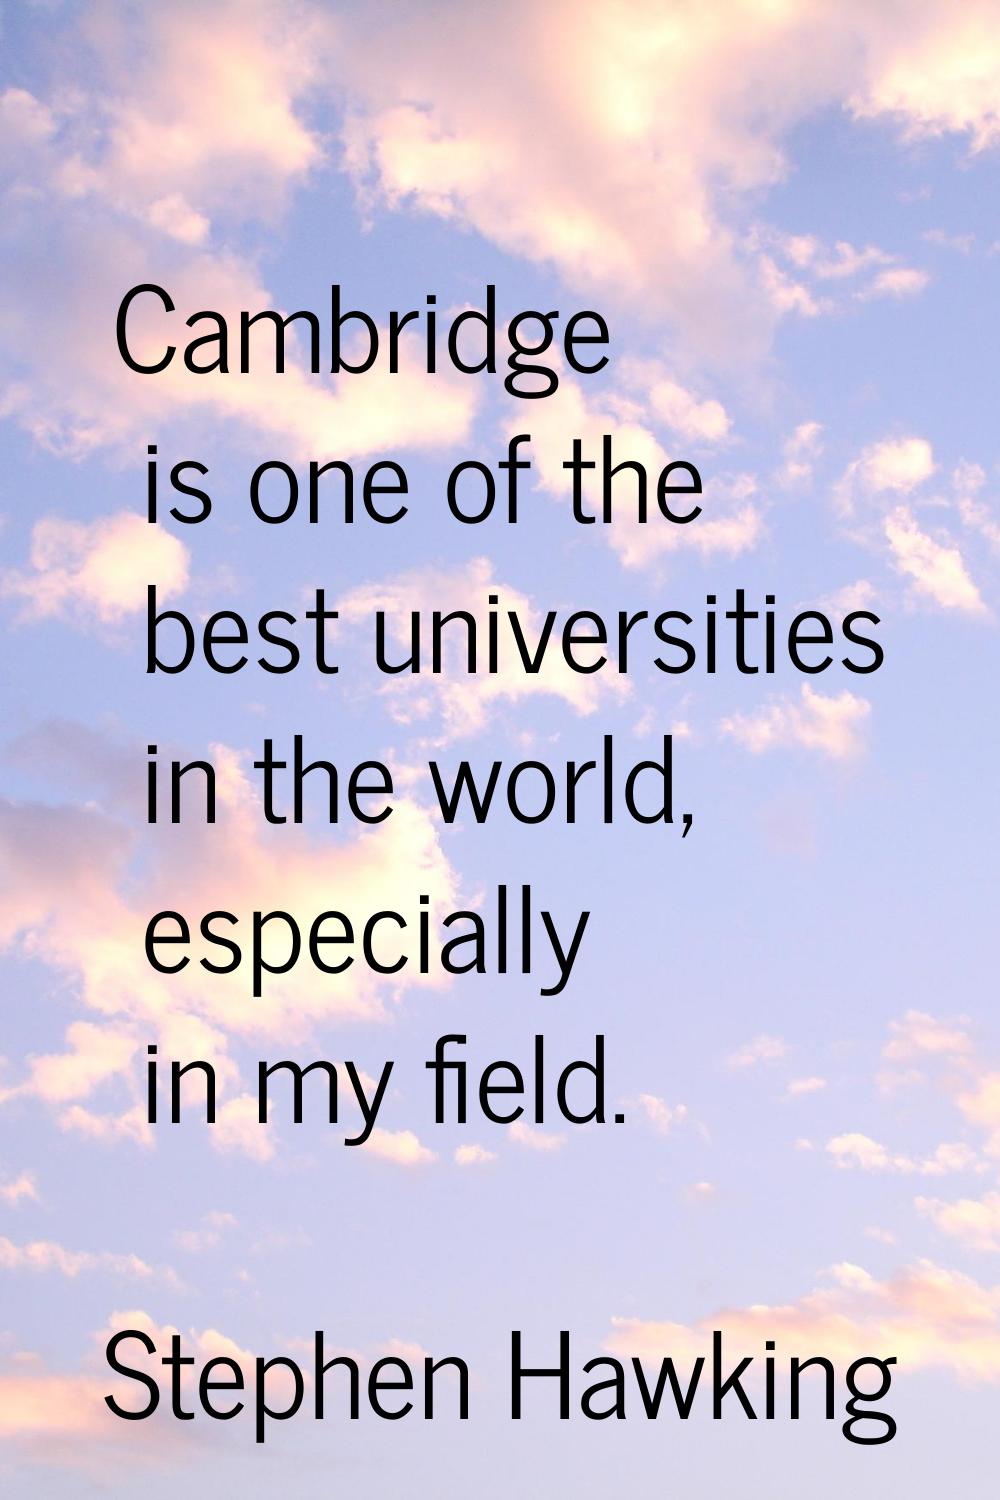 Cambridge is one of the best universities in the world, especially in my field.